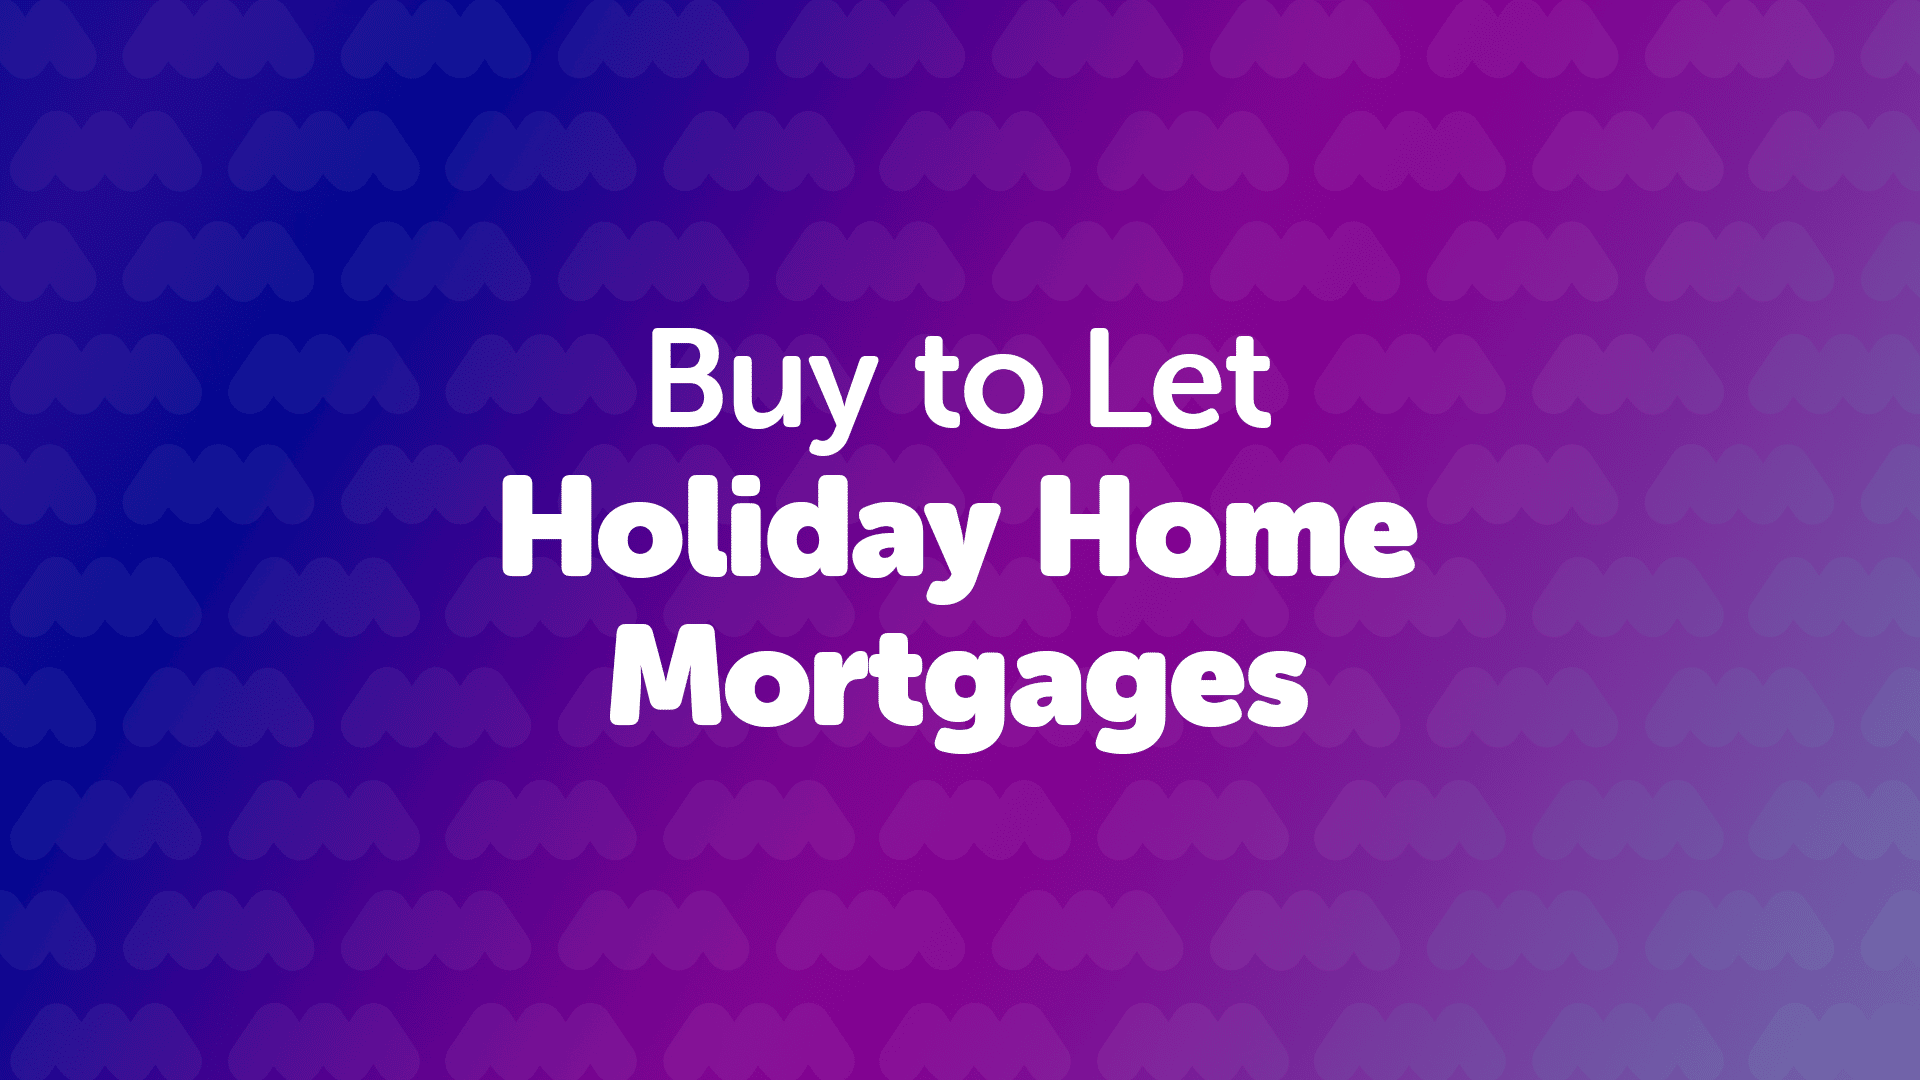 Buy to Let Holiday Homes